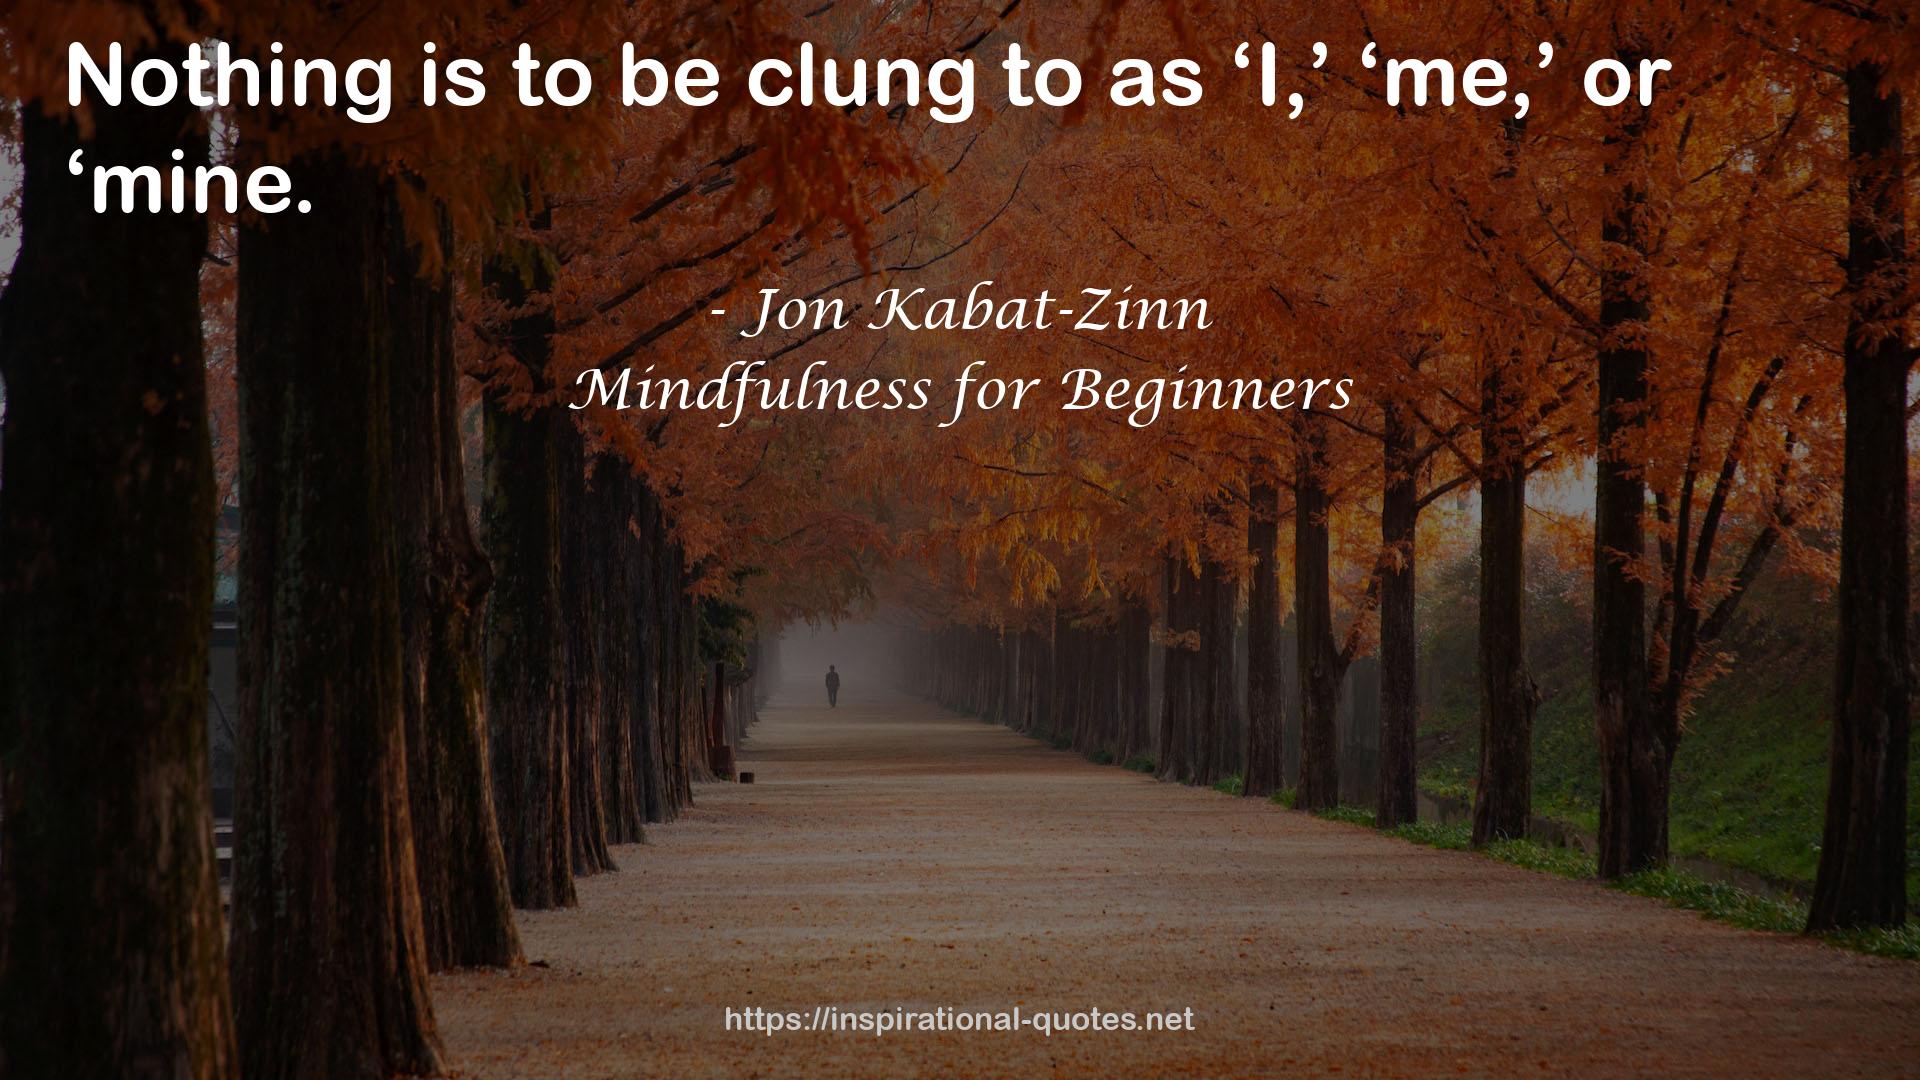 Mindfulness for Beginners QUOTES